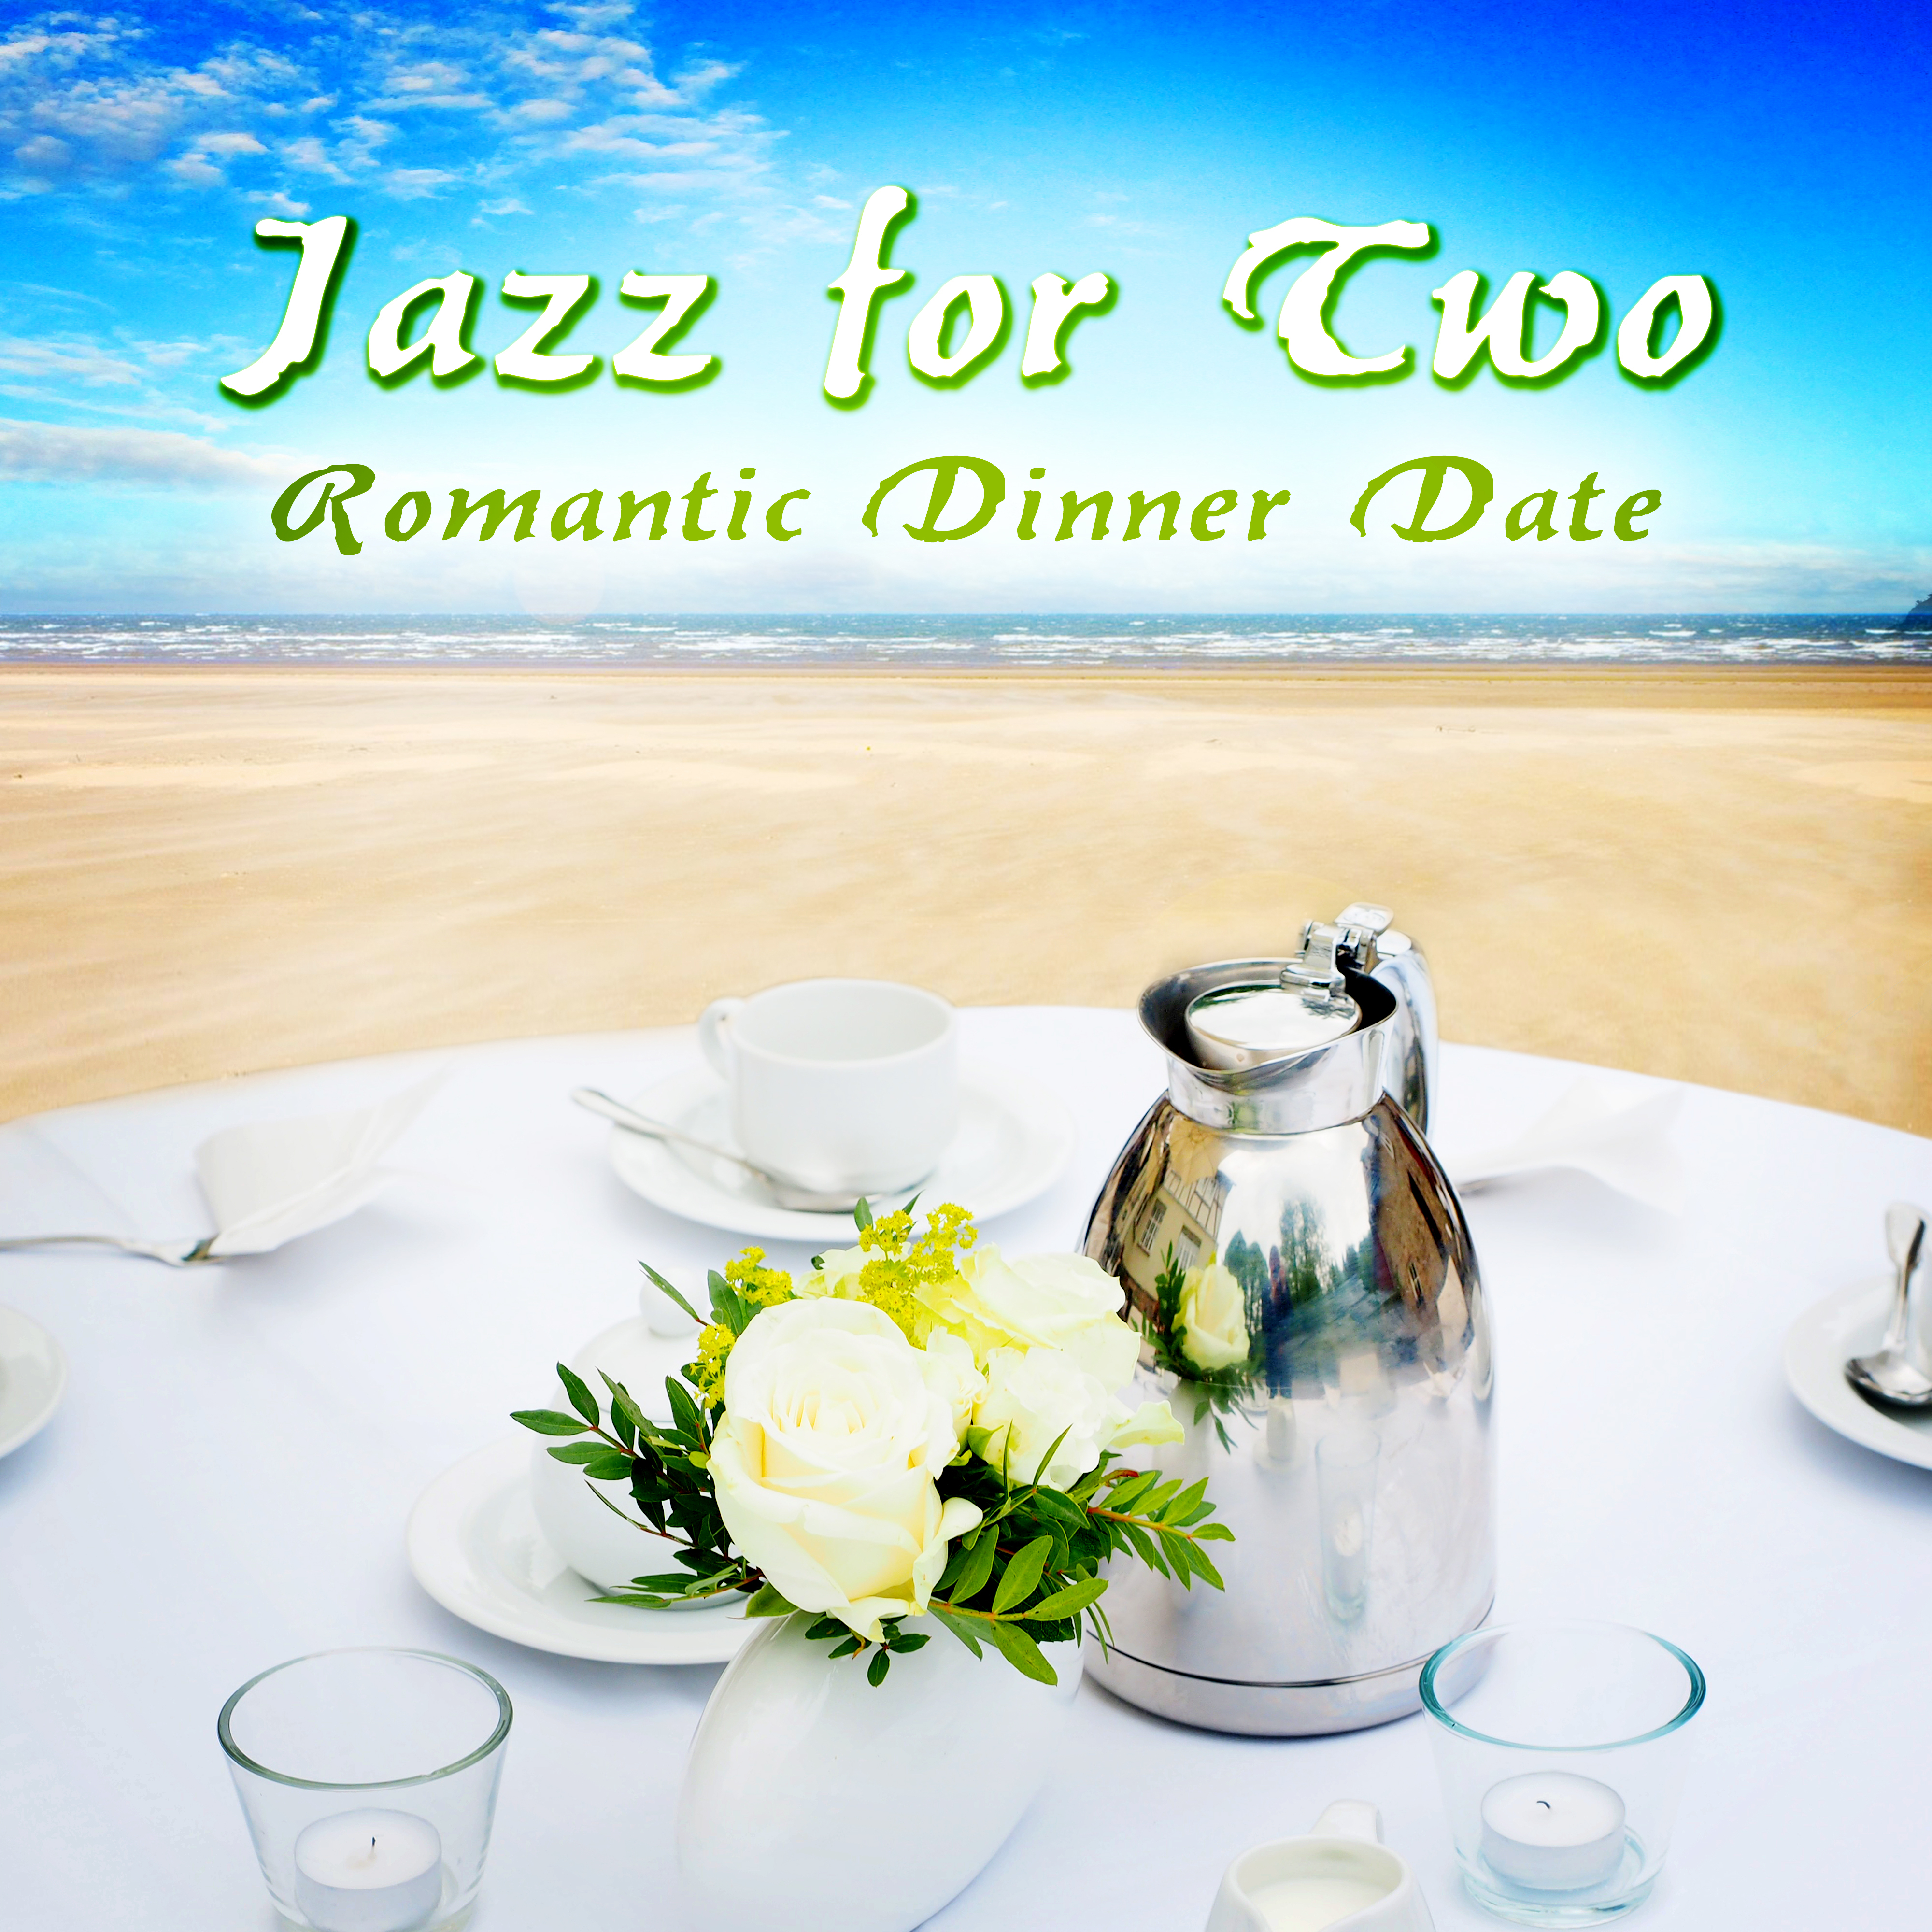 Jazz for Dining